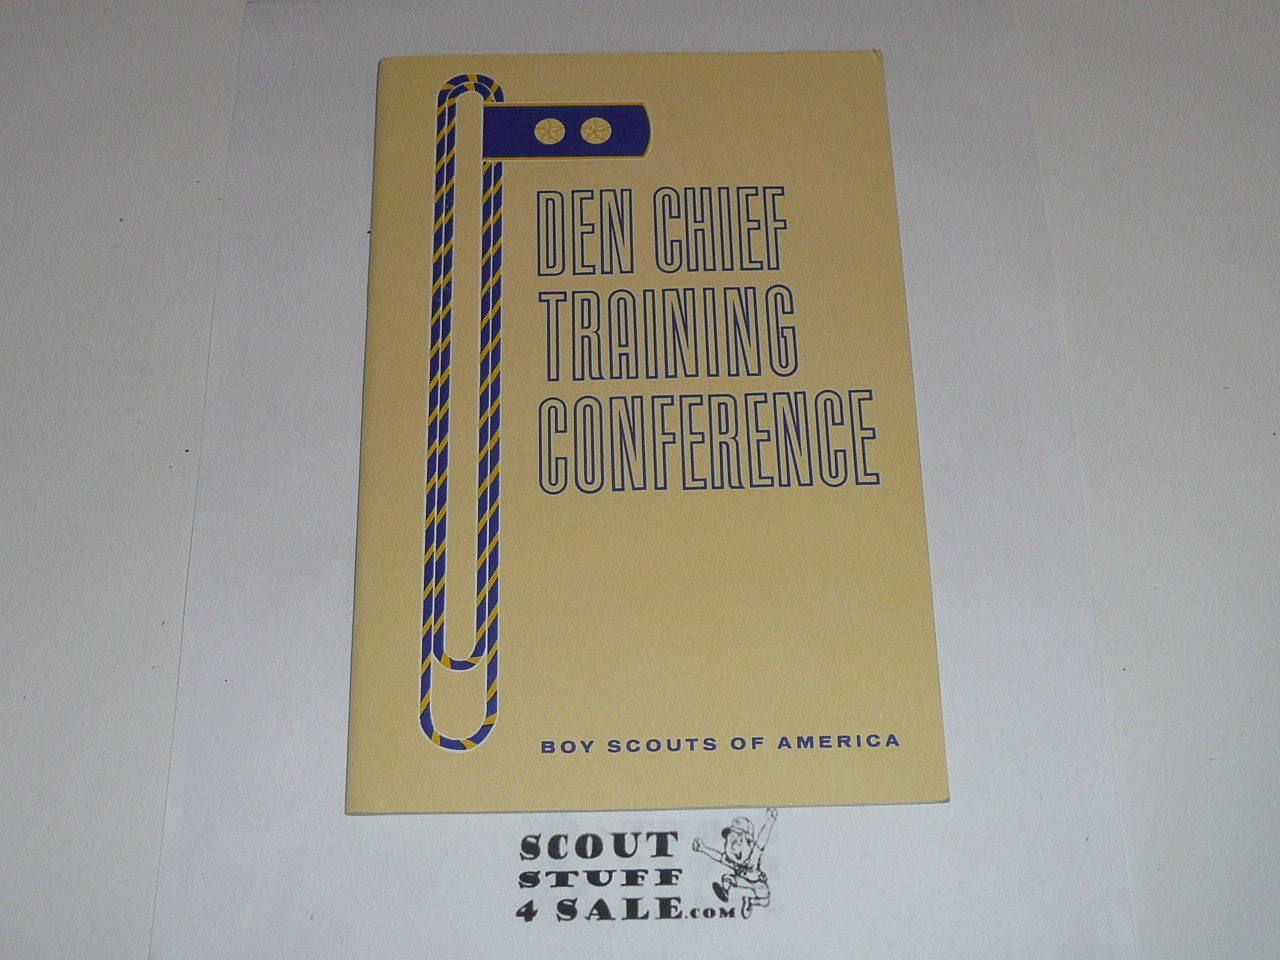 Den Chief Training Conference, Cub Scouts, 5-65 printing